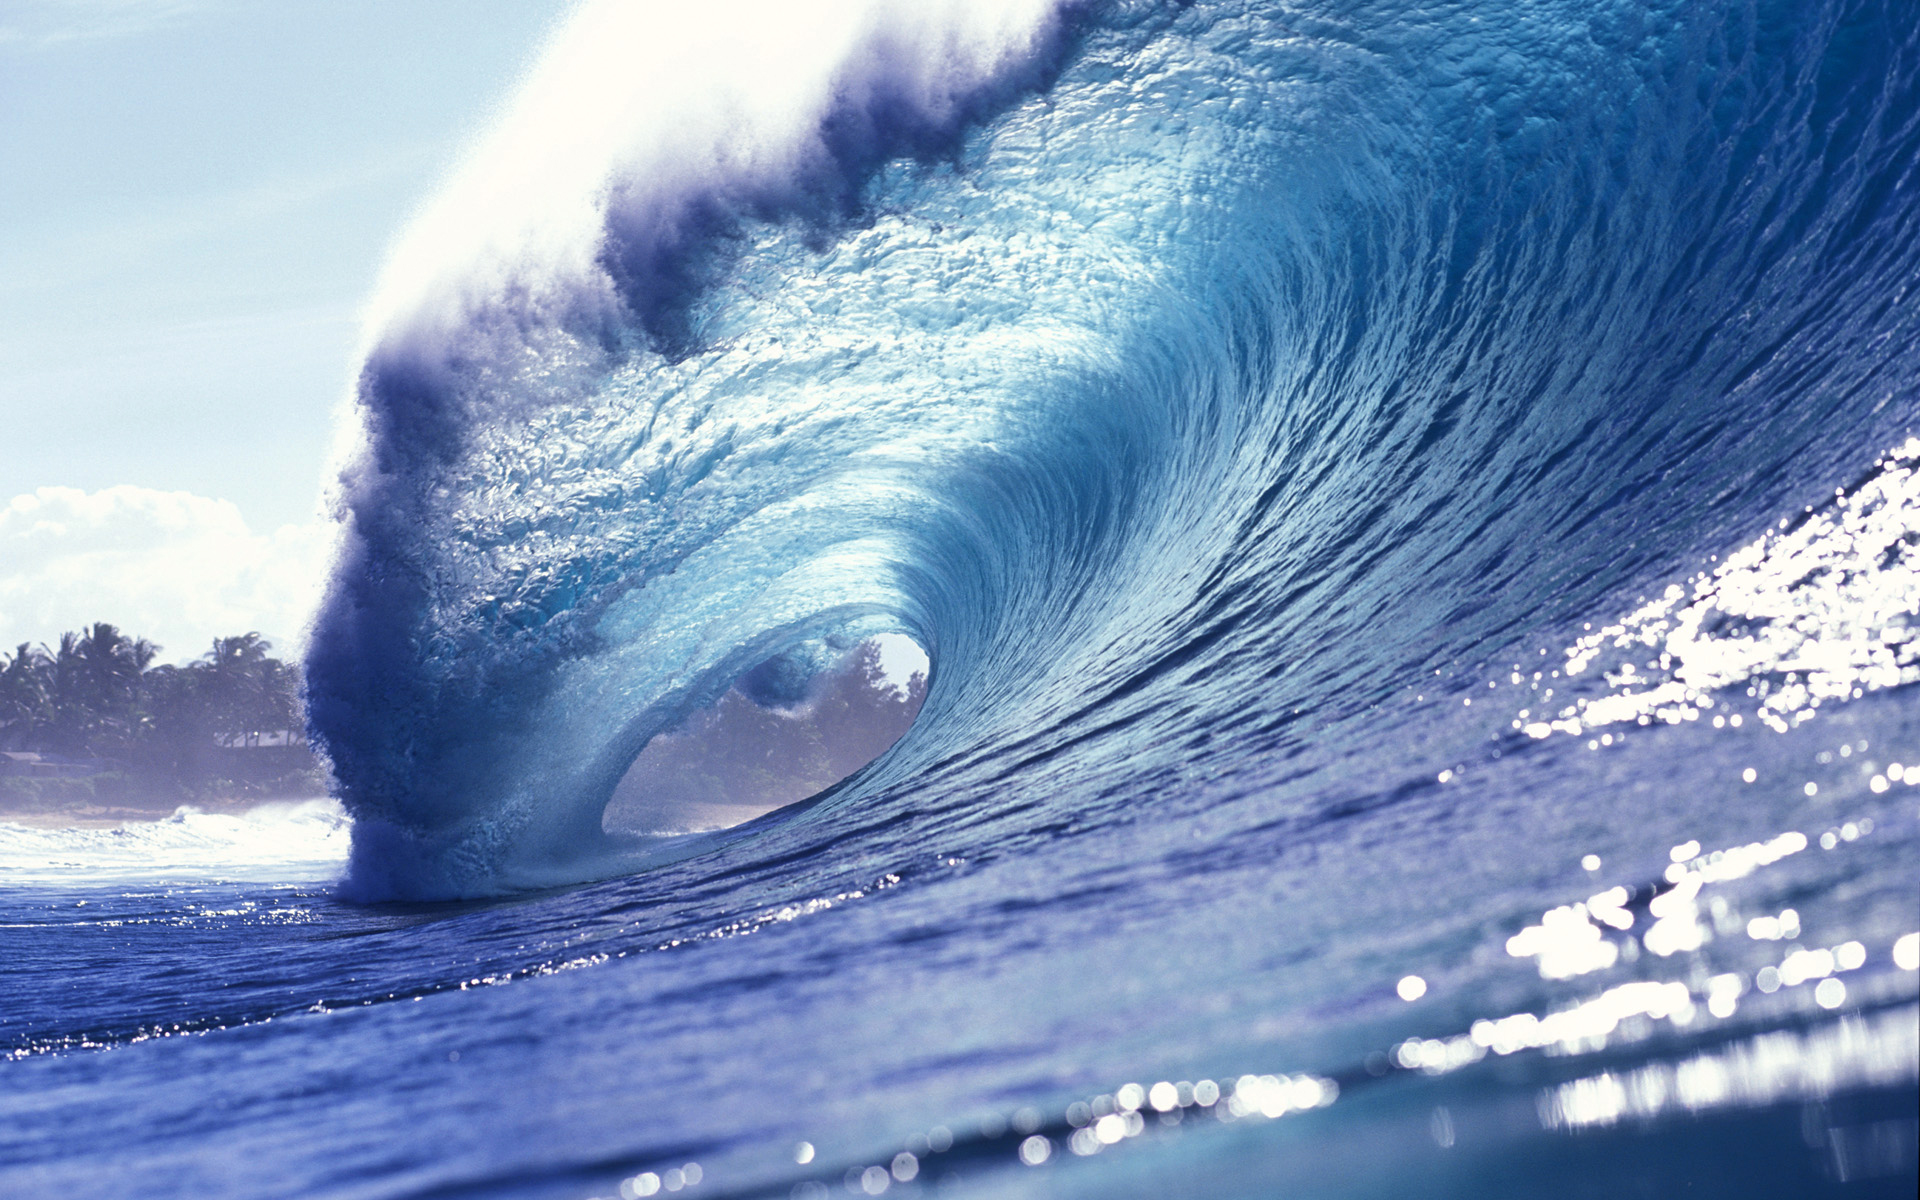 Surfing Wave Wallpapers - 1920x1200 - 1287258